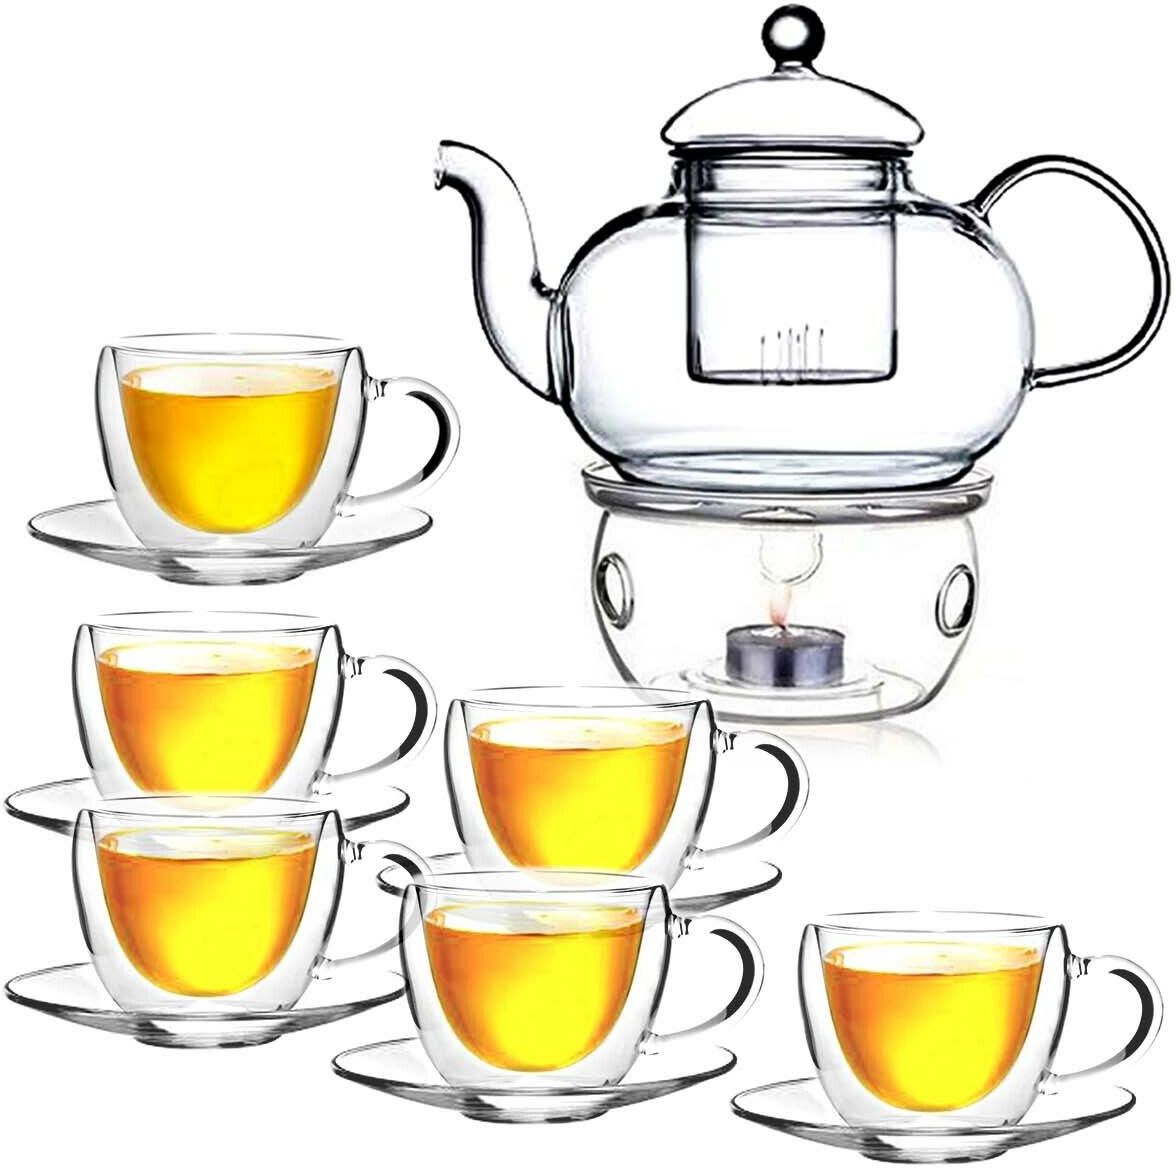 LIYING Double Wall Glass Teapot Set Combined With  Teapot 1 x 600ml ,1 Candle Warmer ,  Clear Classic designedTeacups and Sauce [6 x 120ml], Heat-resistant Stovetop Dishwasher Safe Teapot with Removab